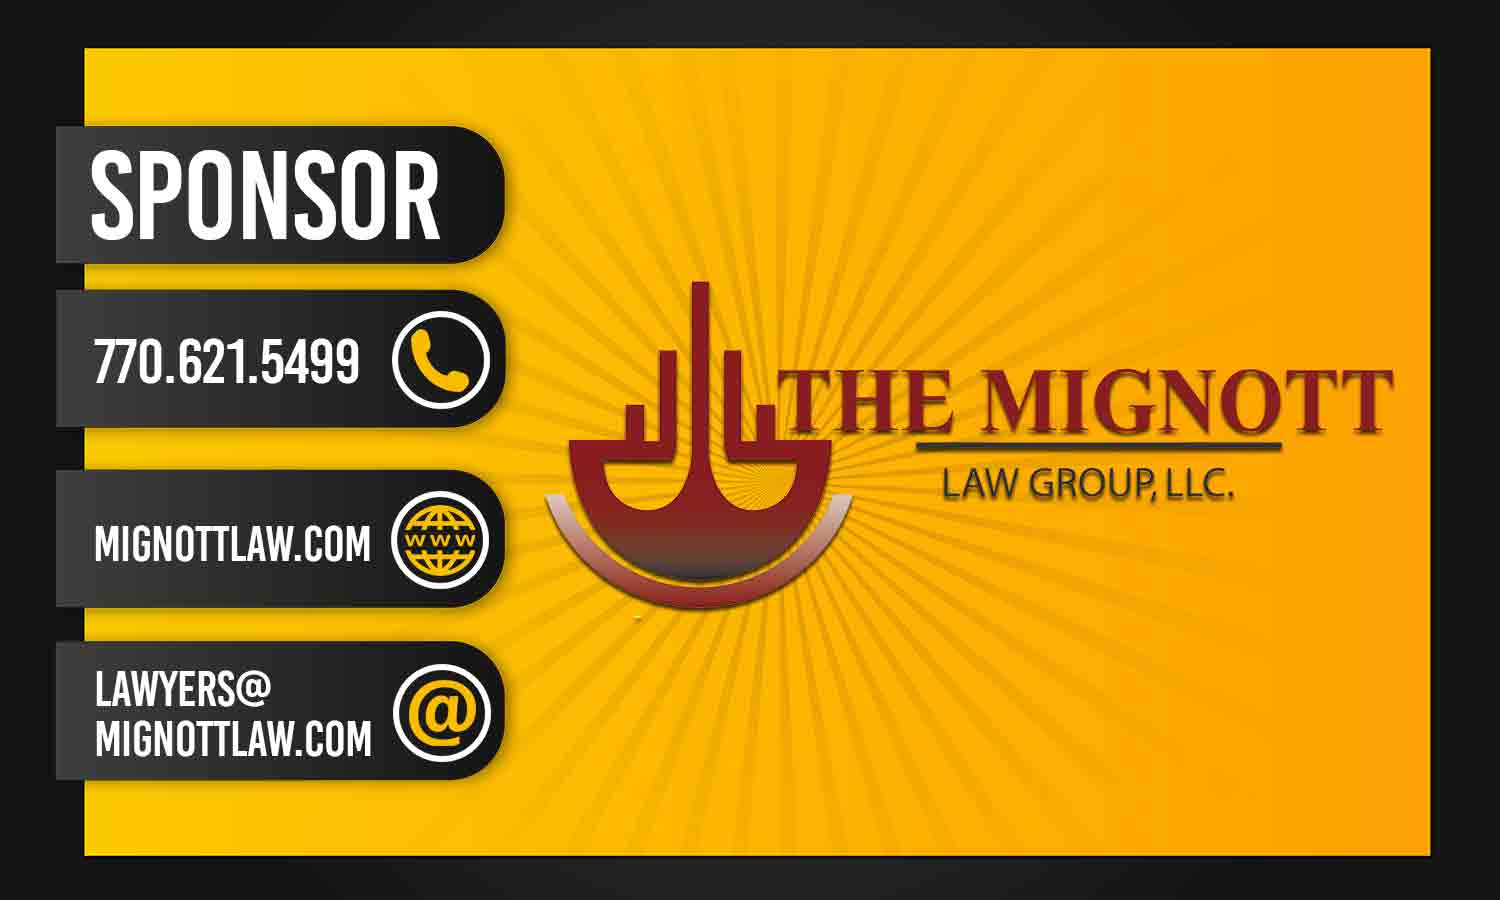 The Mignott Law Group, LLC